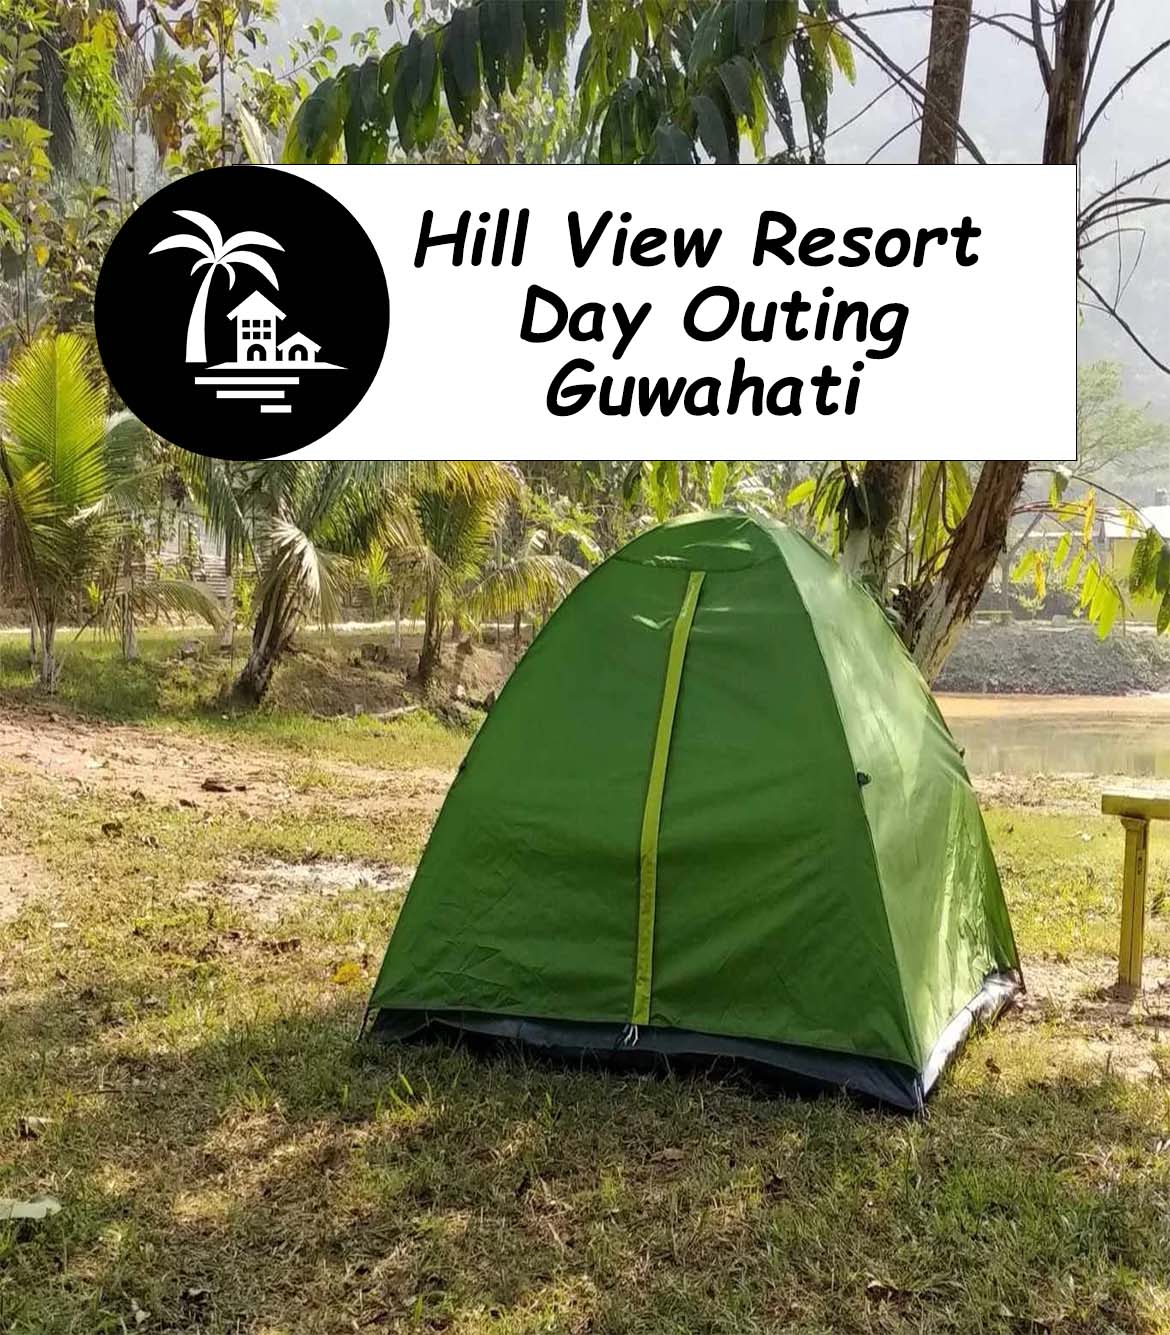 Hill View Resort Day Outing Guwahati